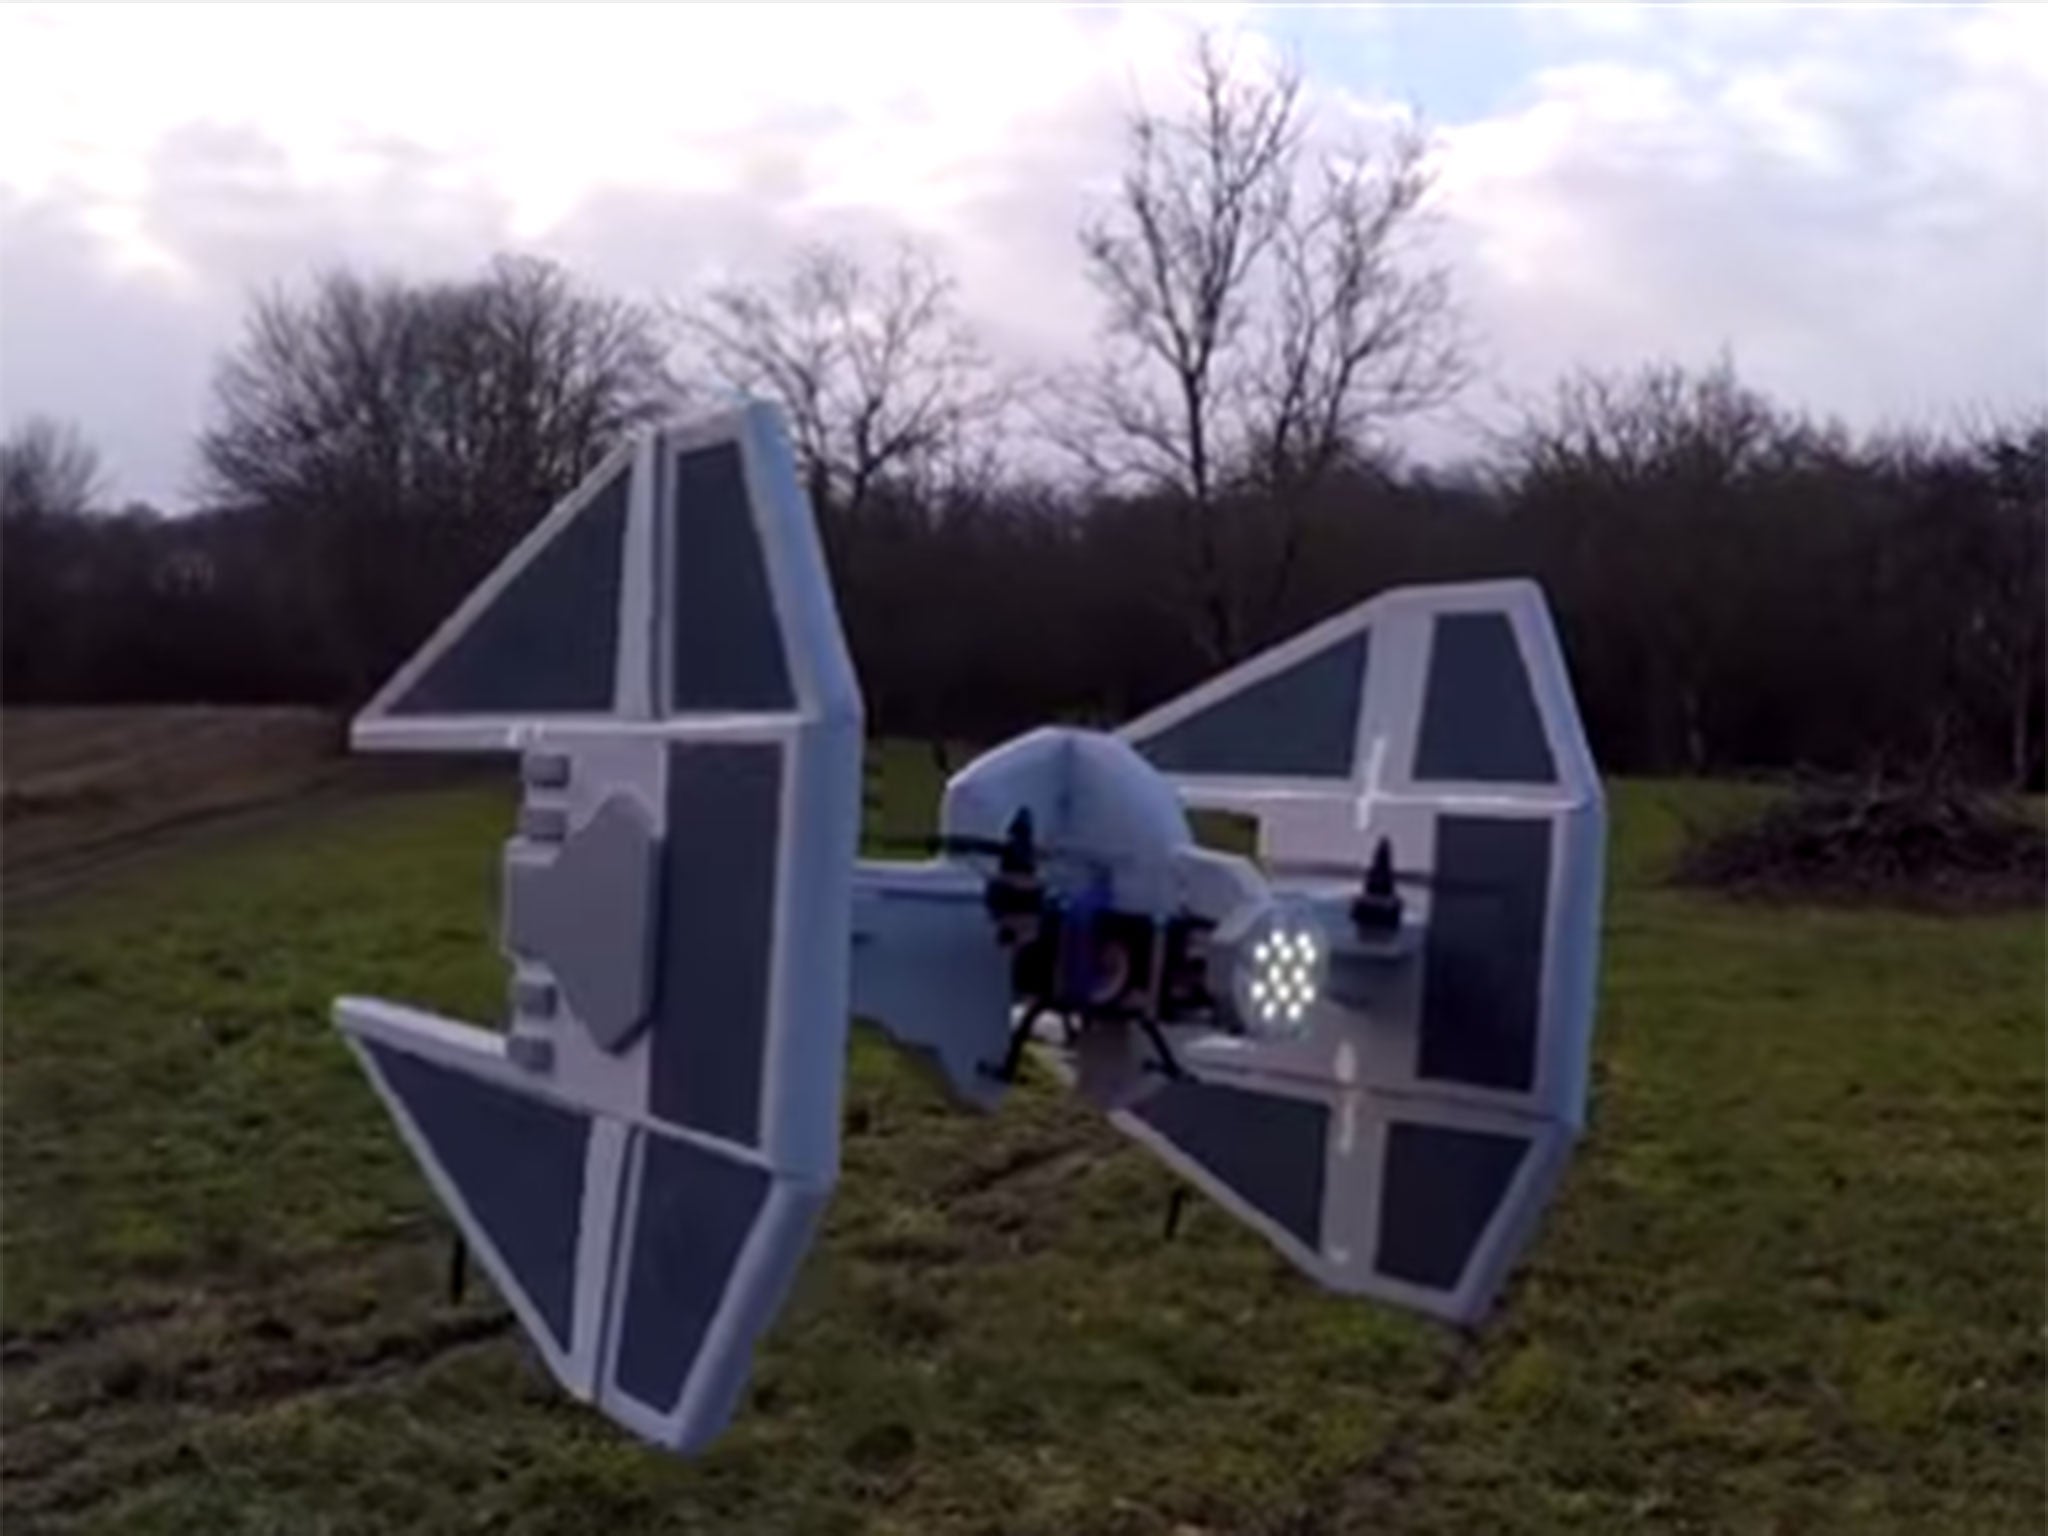 Olivier C is a drone and Star Wars enthusiast